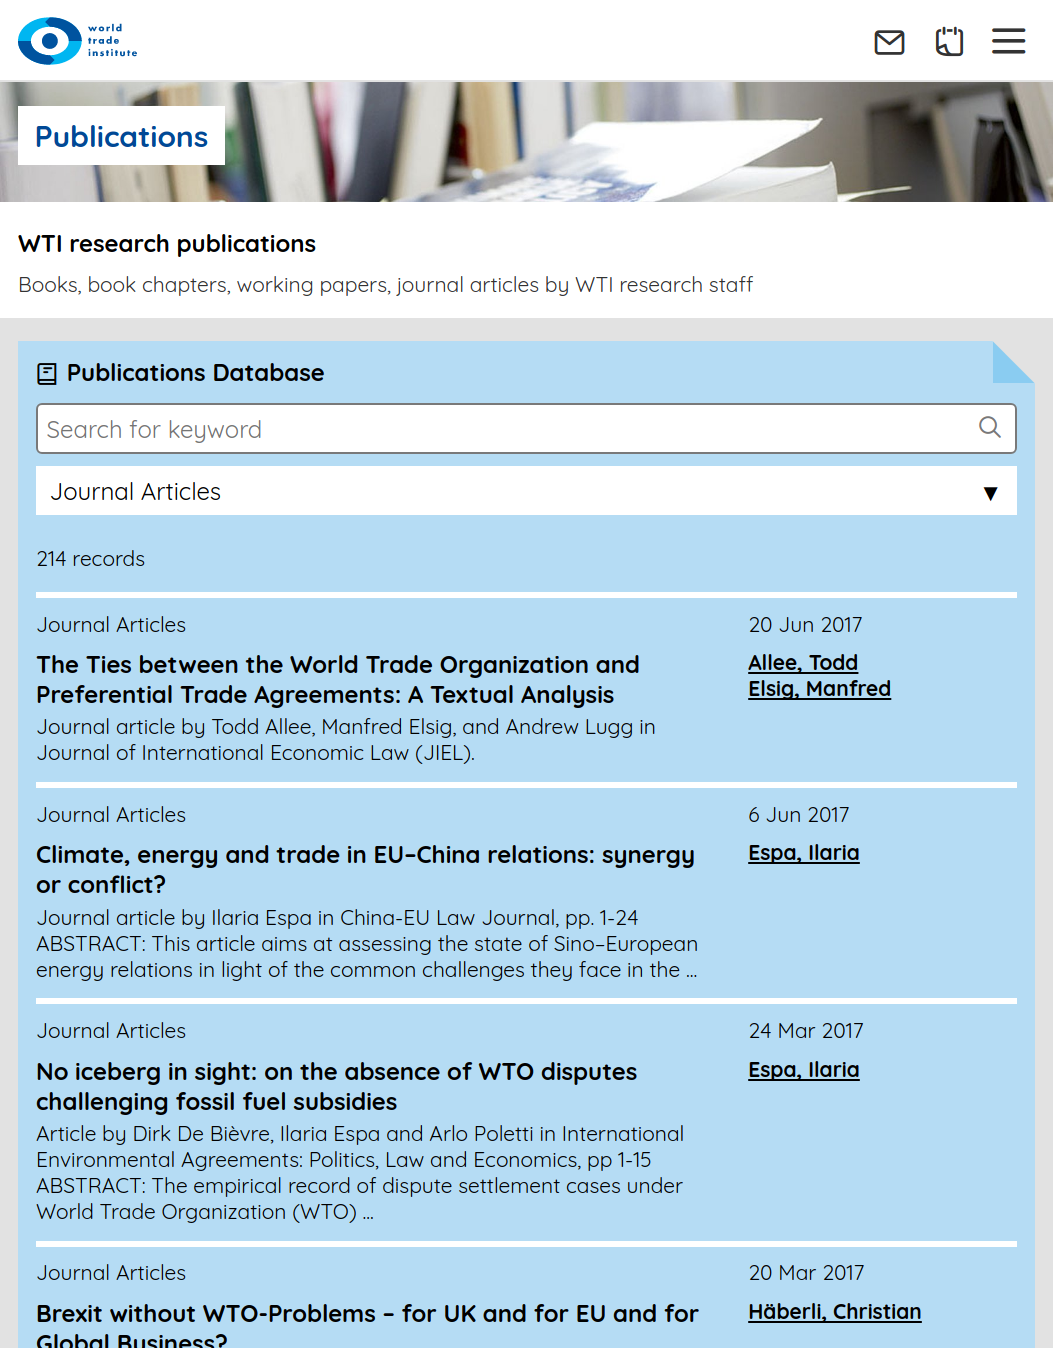 Mobile publications filtering / World Trade Institute